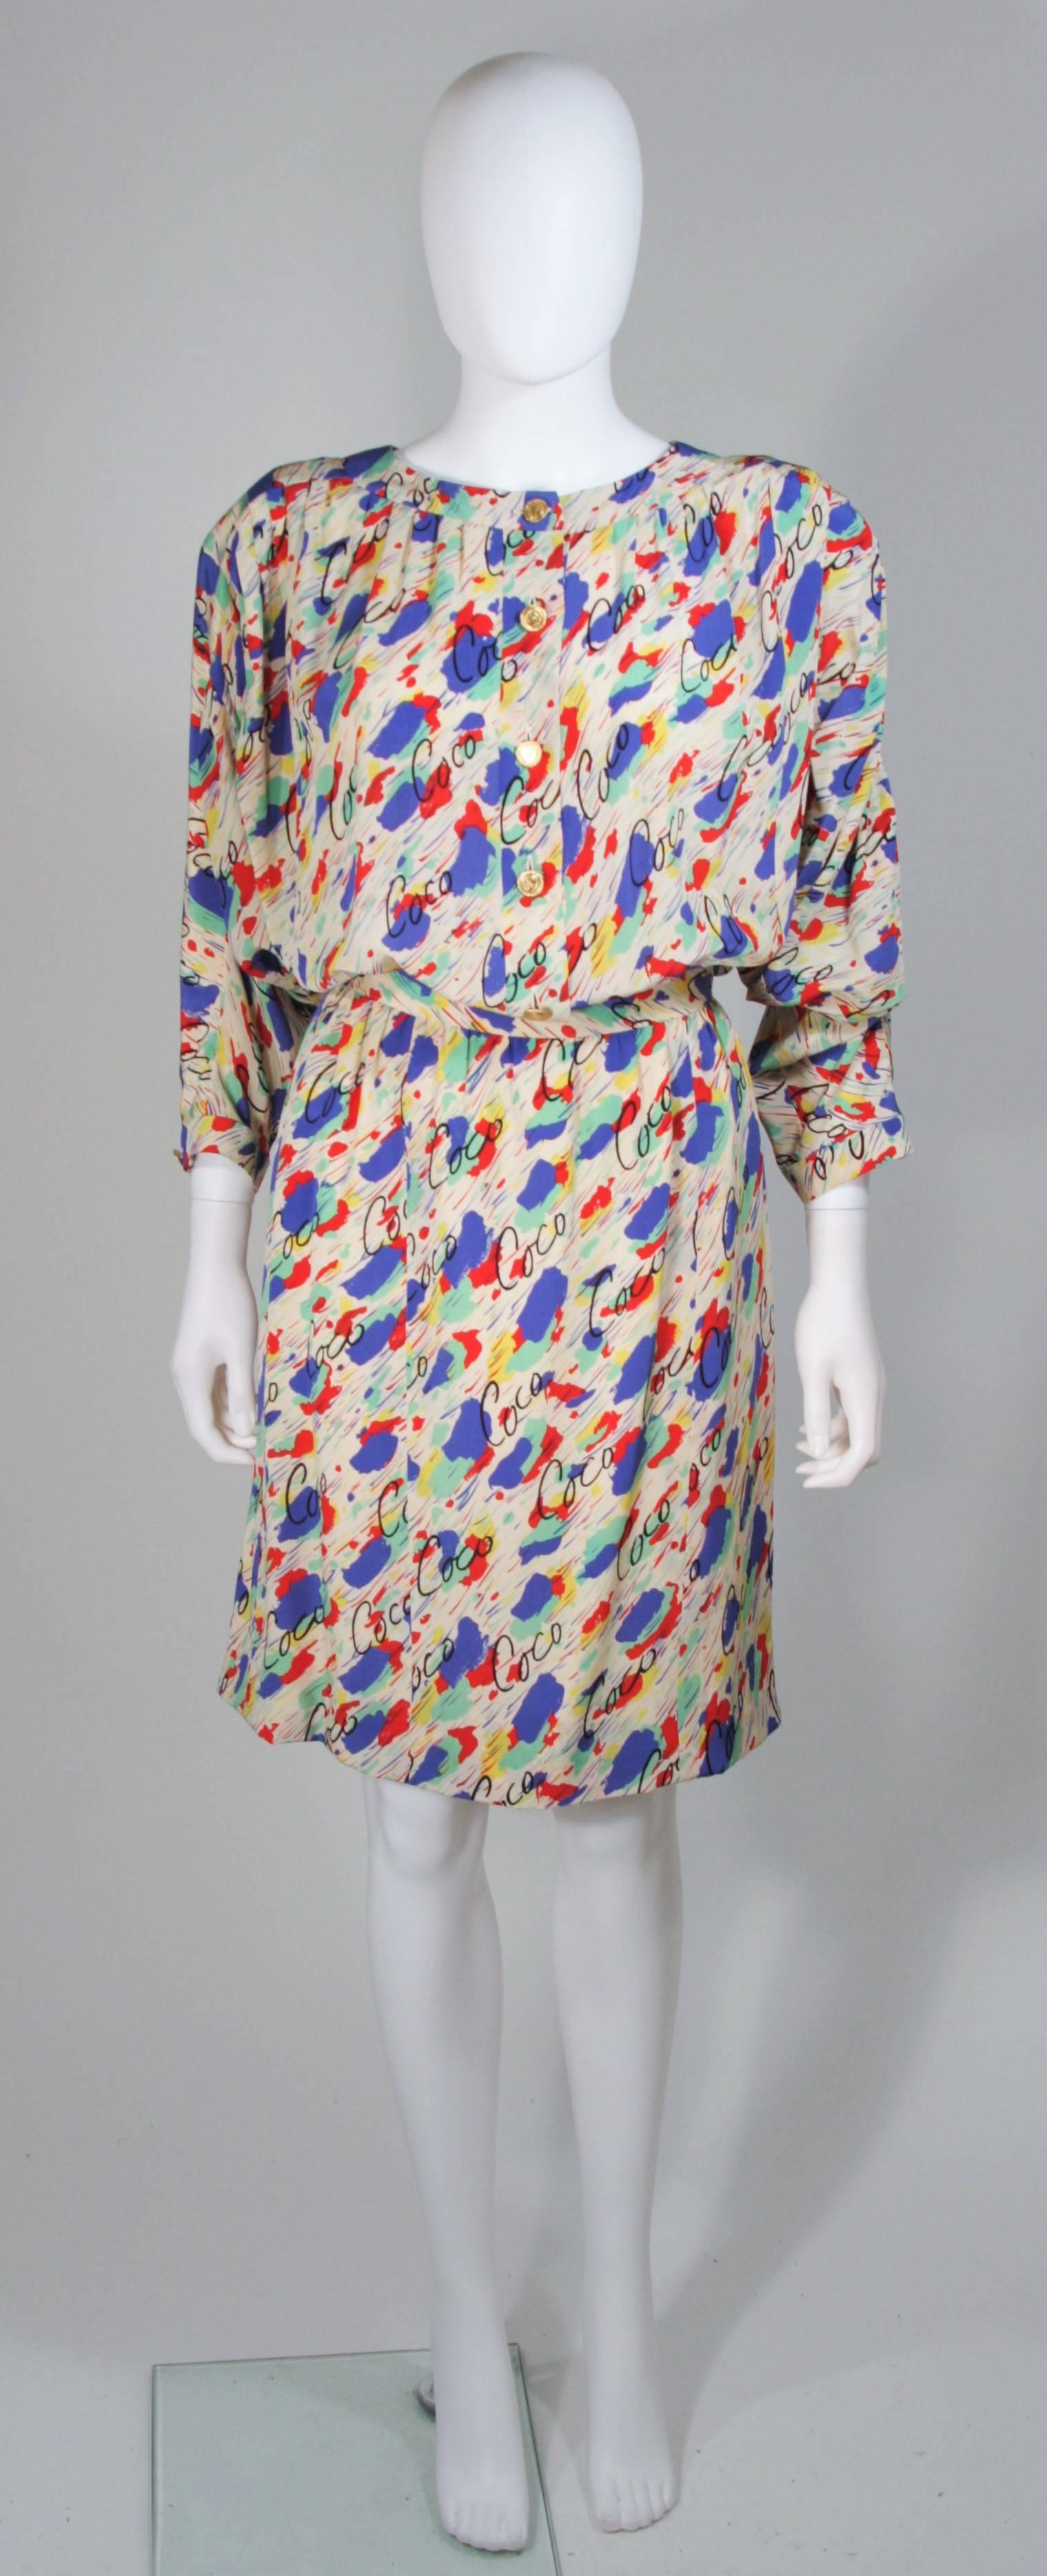  This Chanel set is composed of a silk with an abstract design and 'COCO' print. The blouse features a gathered style and 3/4 (padded removable at buyers discretion) dolman style sleeves, with center front button closures. The pencil style skirt